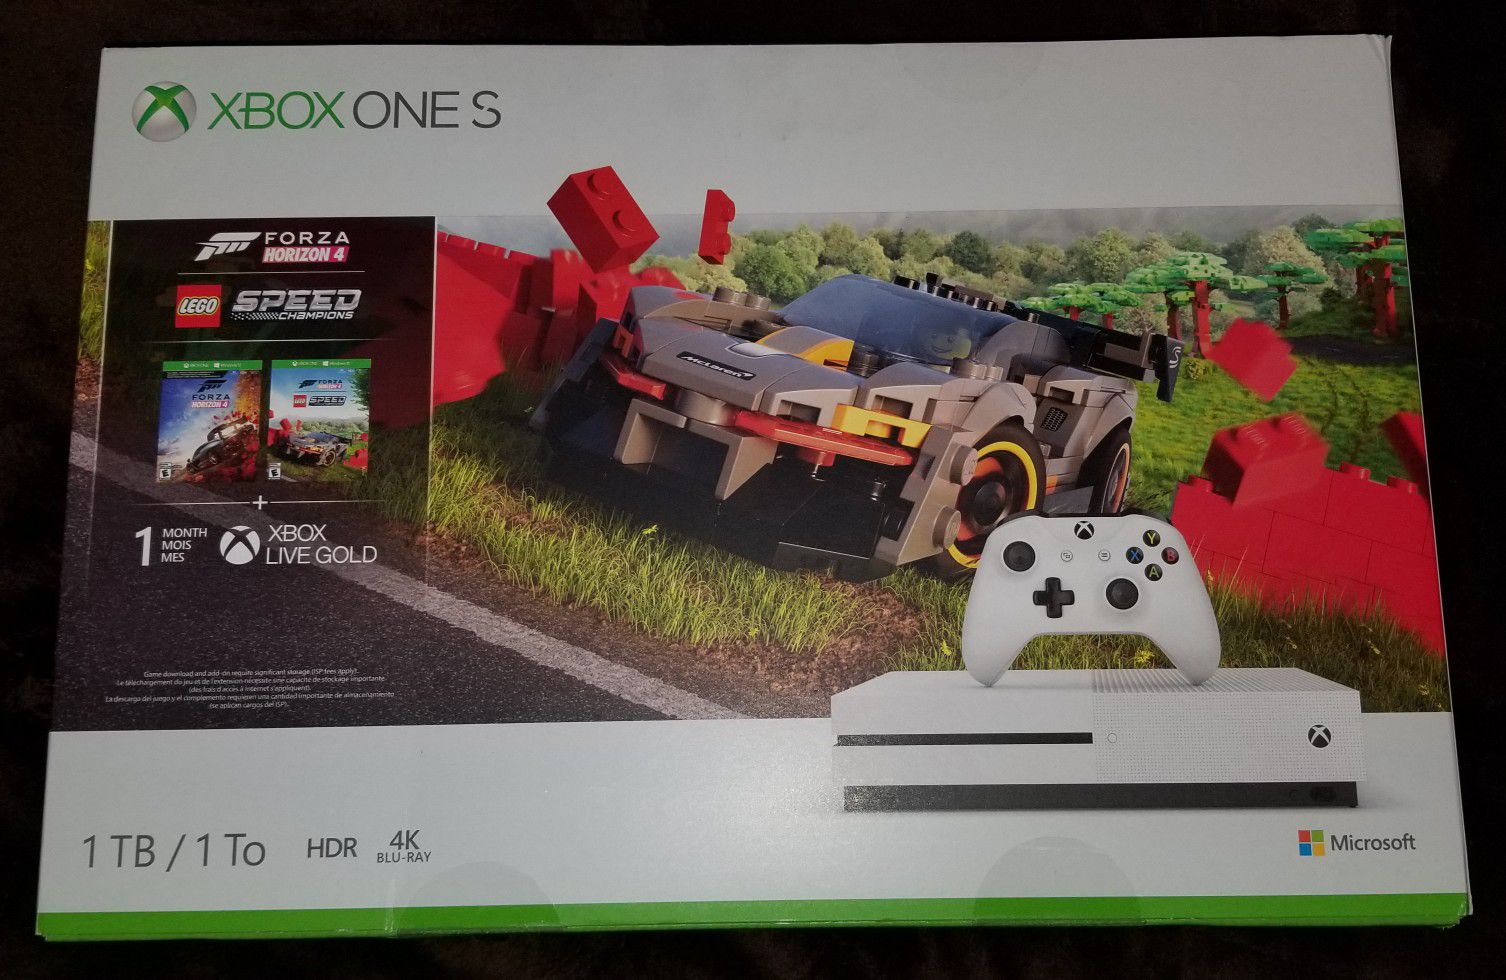 Factory Sealed XBOX ONE S 1TB Bundle with 2 Free Games (Forza 4 & Lego Speed Champions) + 1 Month LIVE GOLD & Game Pass